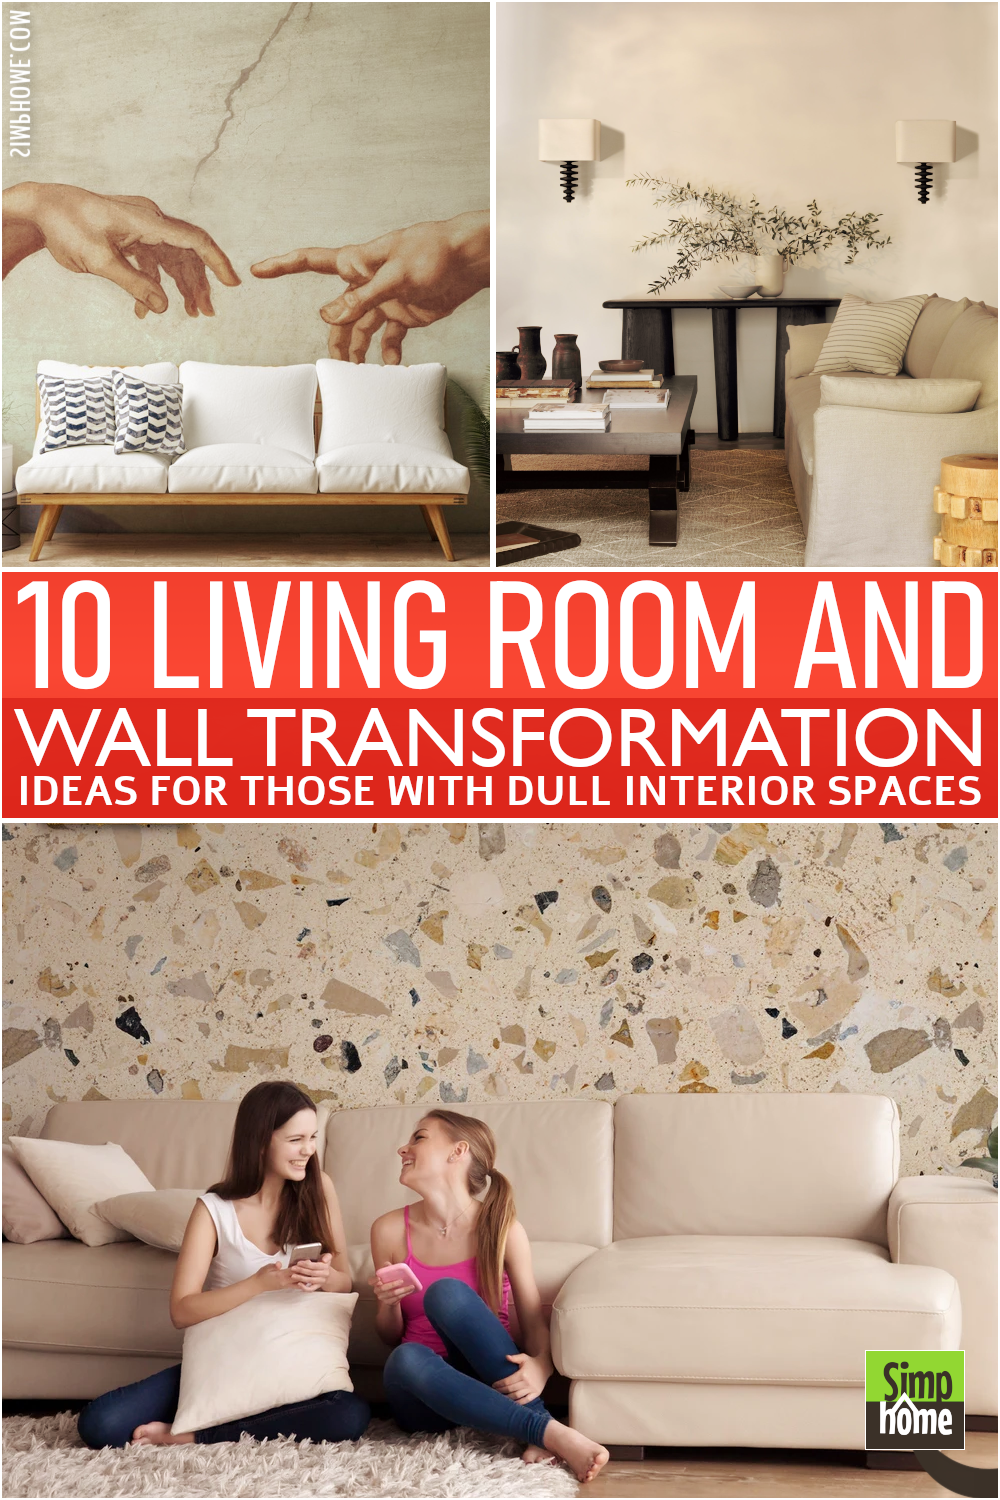 10 Living Room Wall Transformations Poster Image from Simphome.com